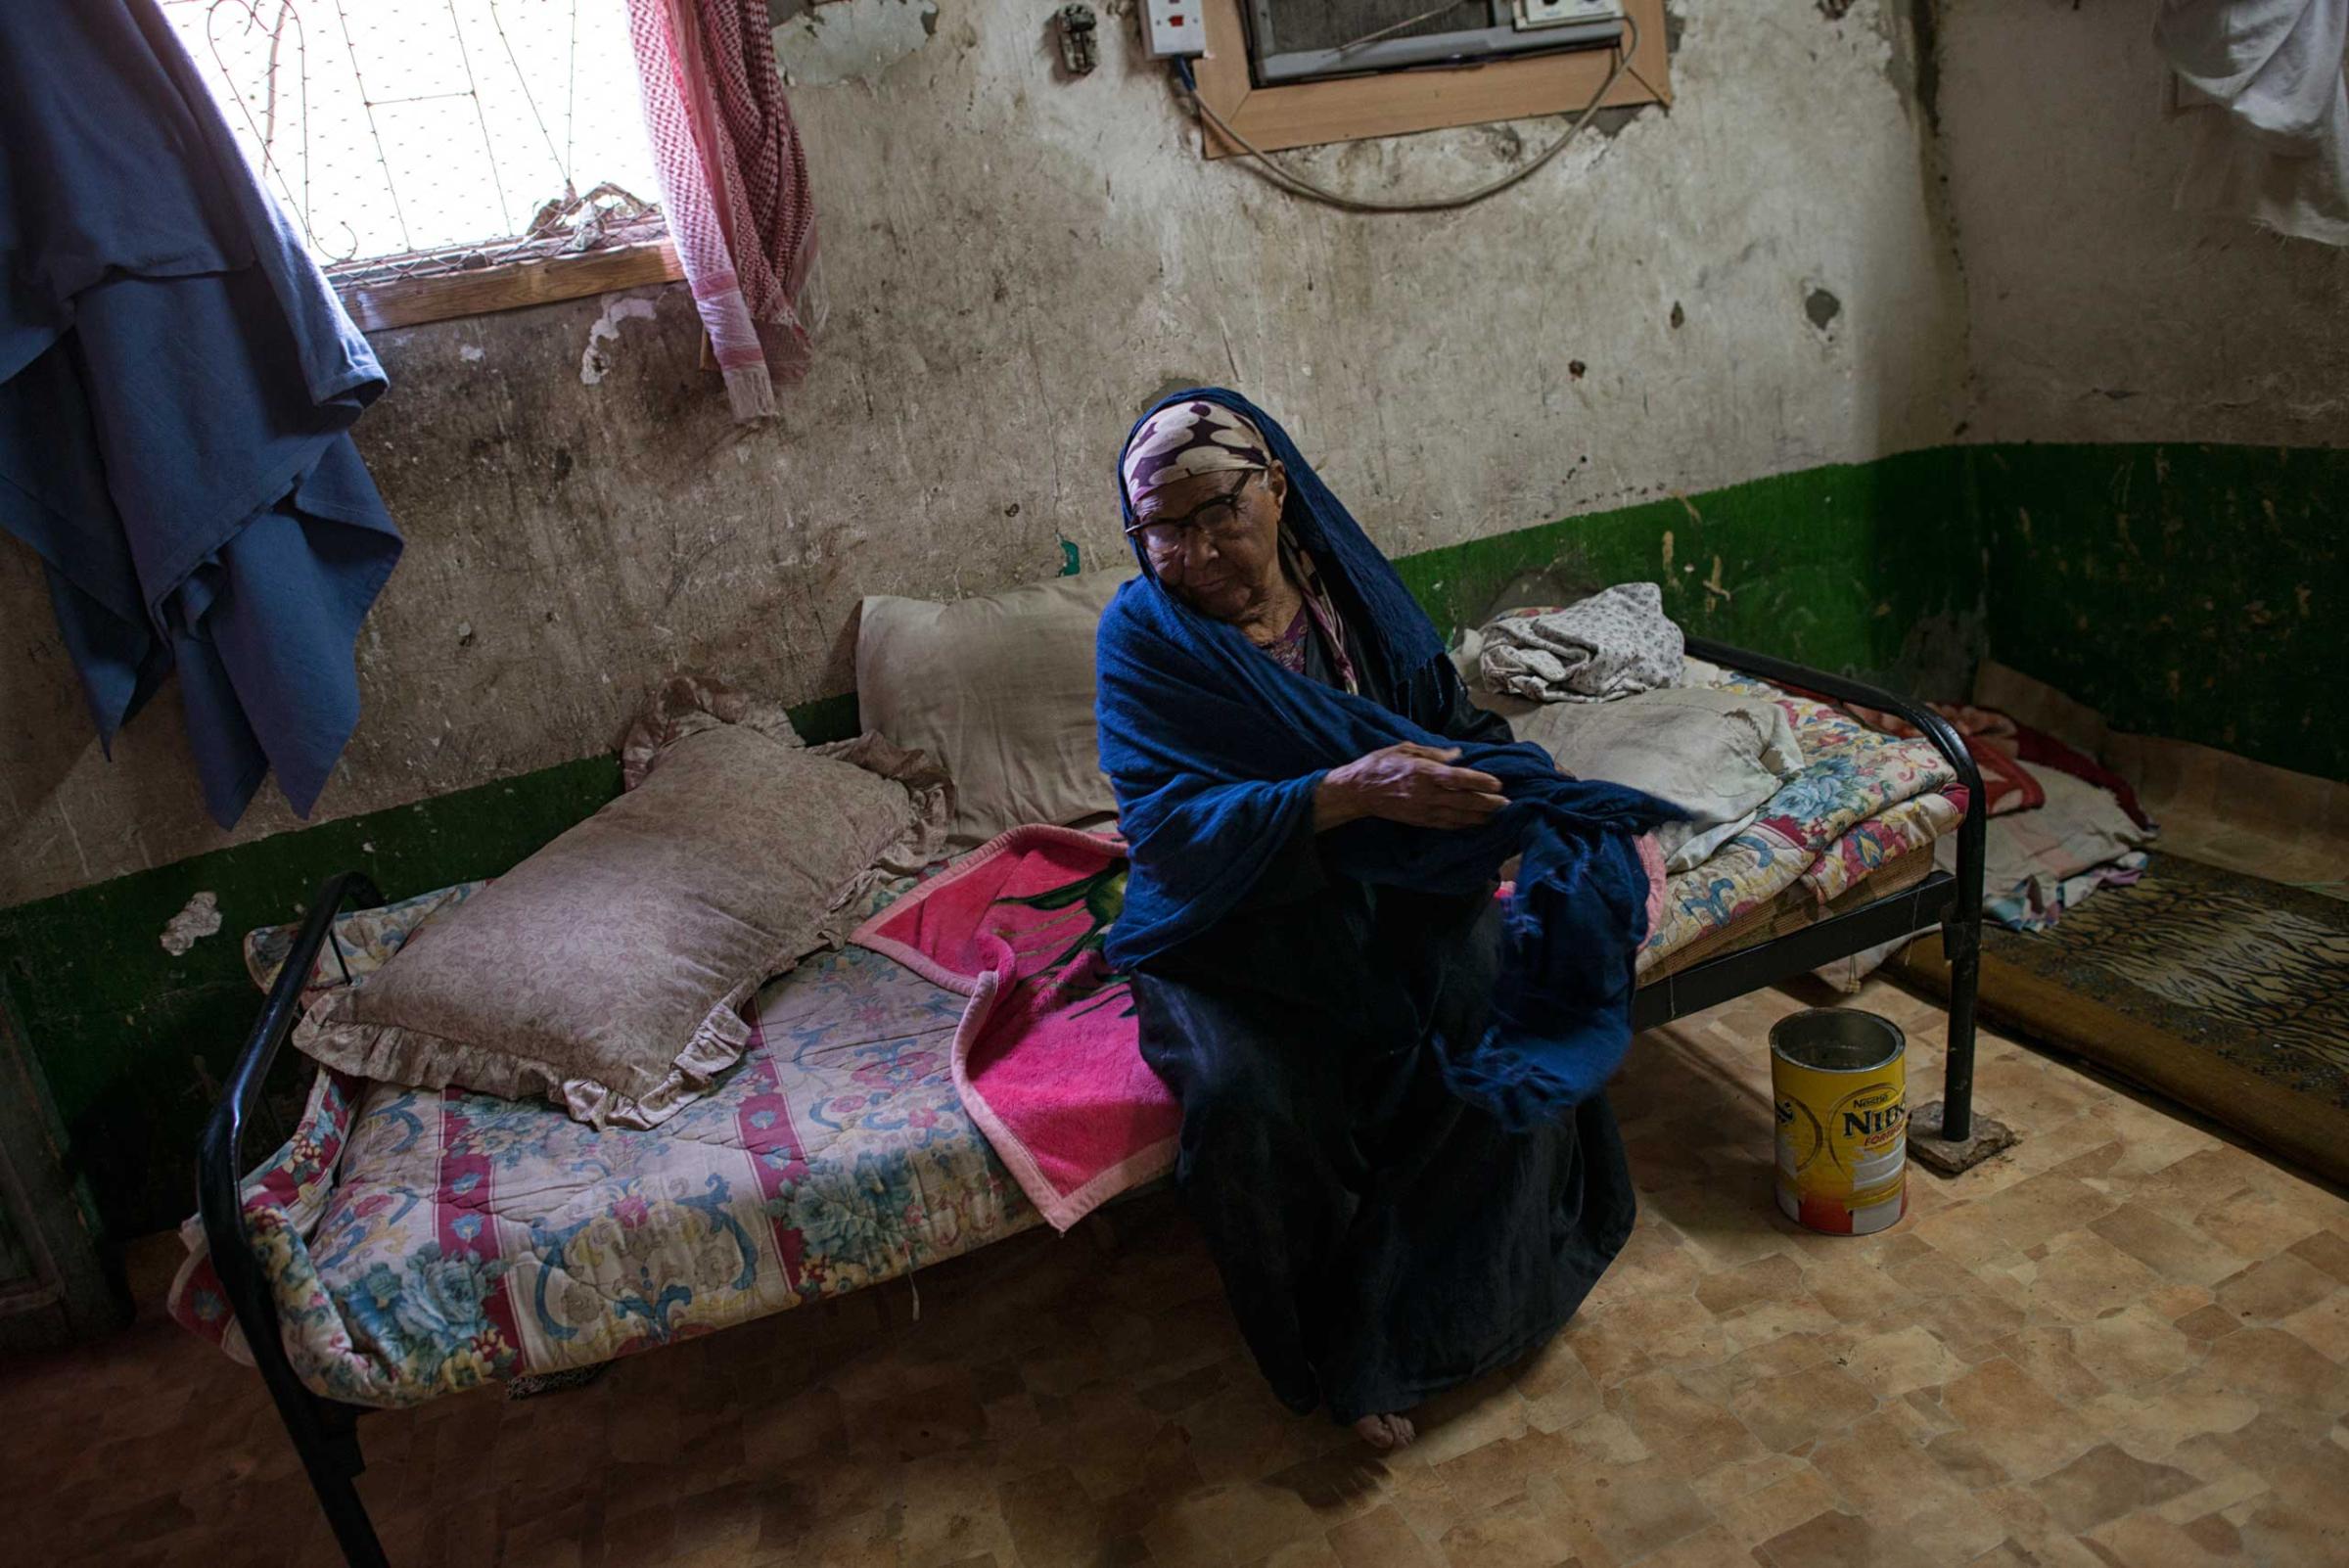 Selma Saleh, a poor Saudi woman, sits on her bed in squalor in a neighborhood in South Riyadh, Saudi Arabia,  March 1, 2013.   Like many families across Saudi Arabia who are barely scraping above the poverty line each month, this family relies on the hope of the charity of others to survive. (Credit: Lynsey Addario/ VII)